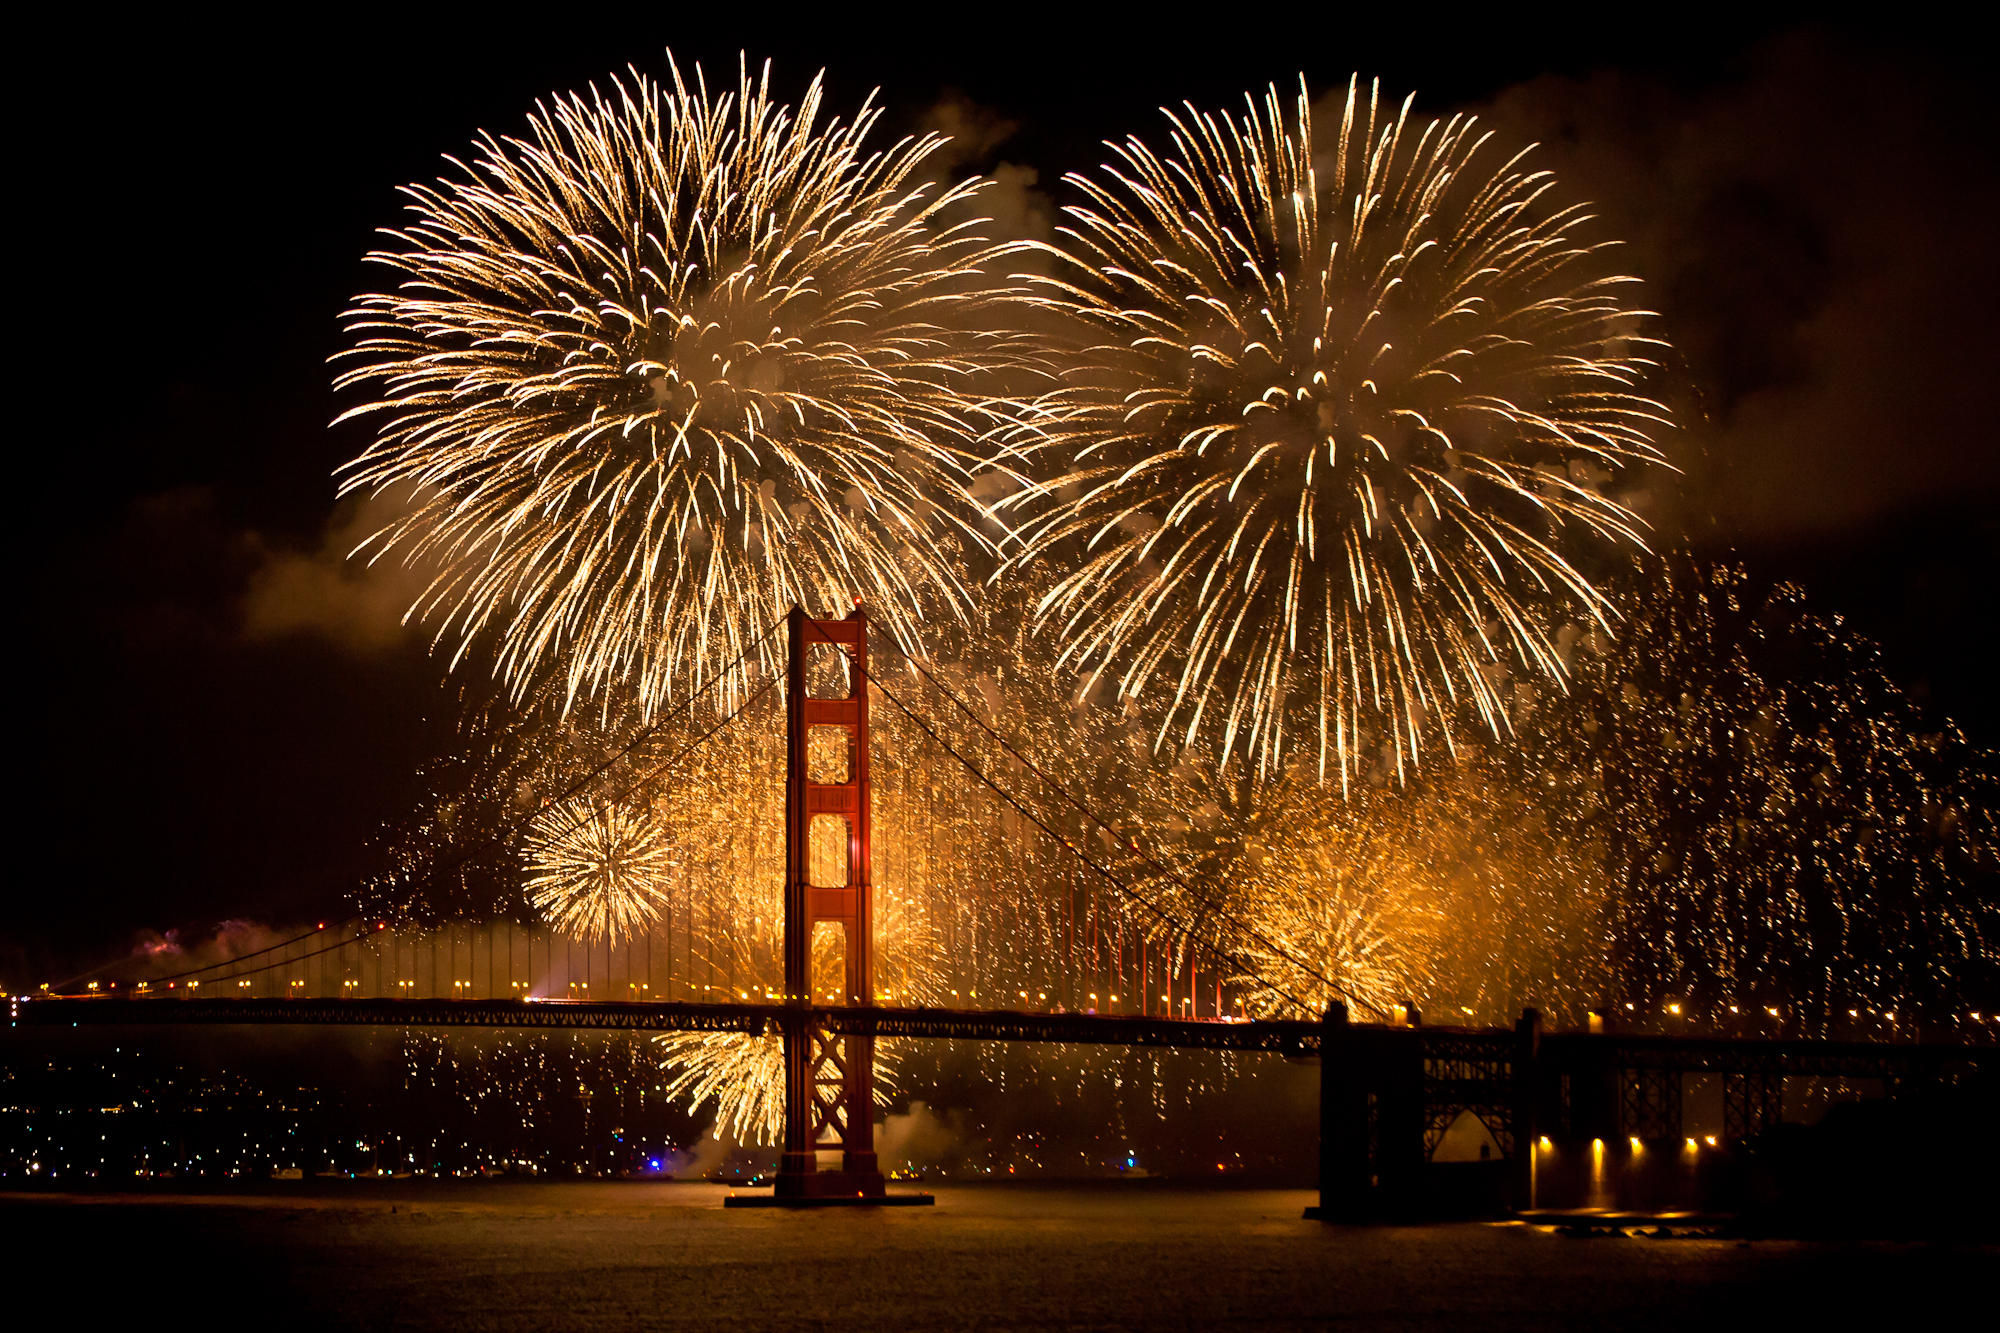 Mike Mehiel Photography - 75th Anniversary of the Golden Gate Bridge